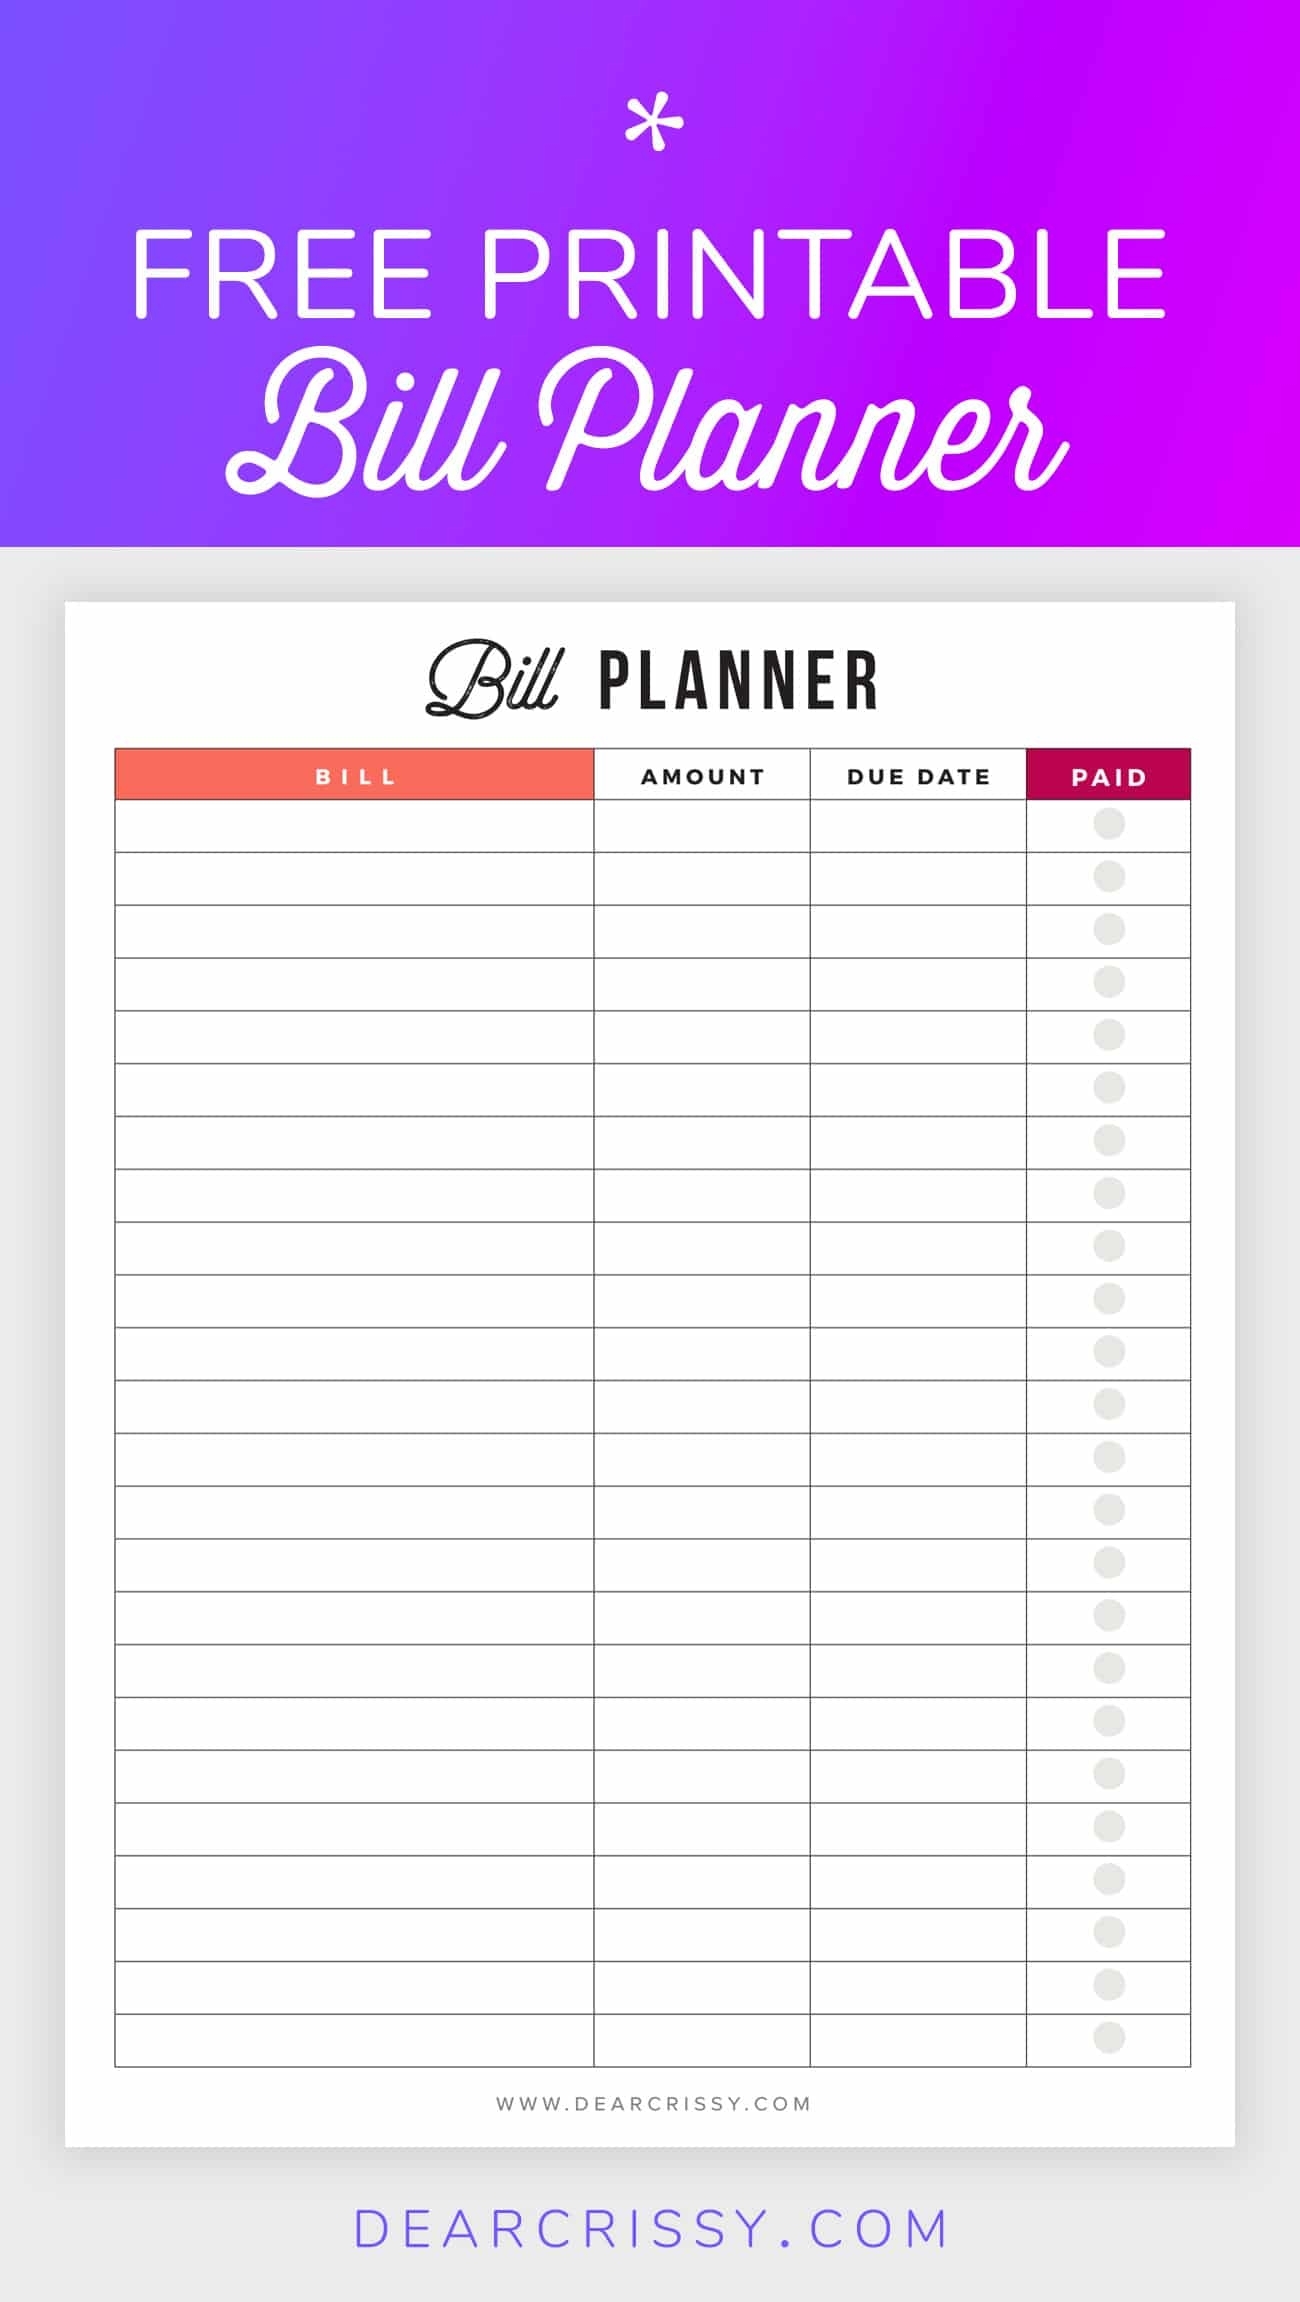 Bill Planner Printable - Pay Down Your Bills This Year! intended for Printable Monthly Bill Organizer Template